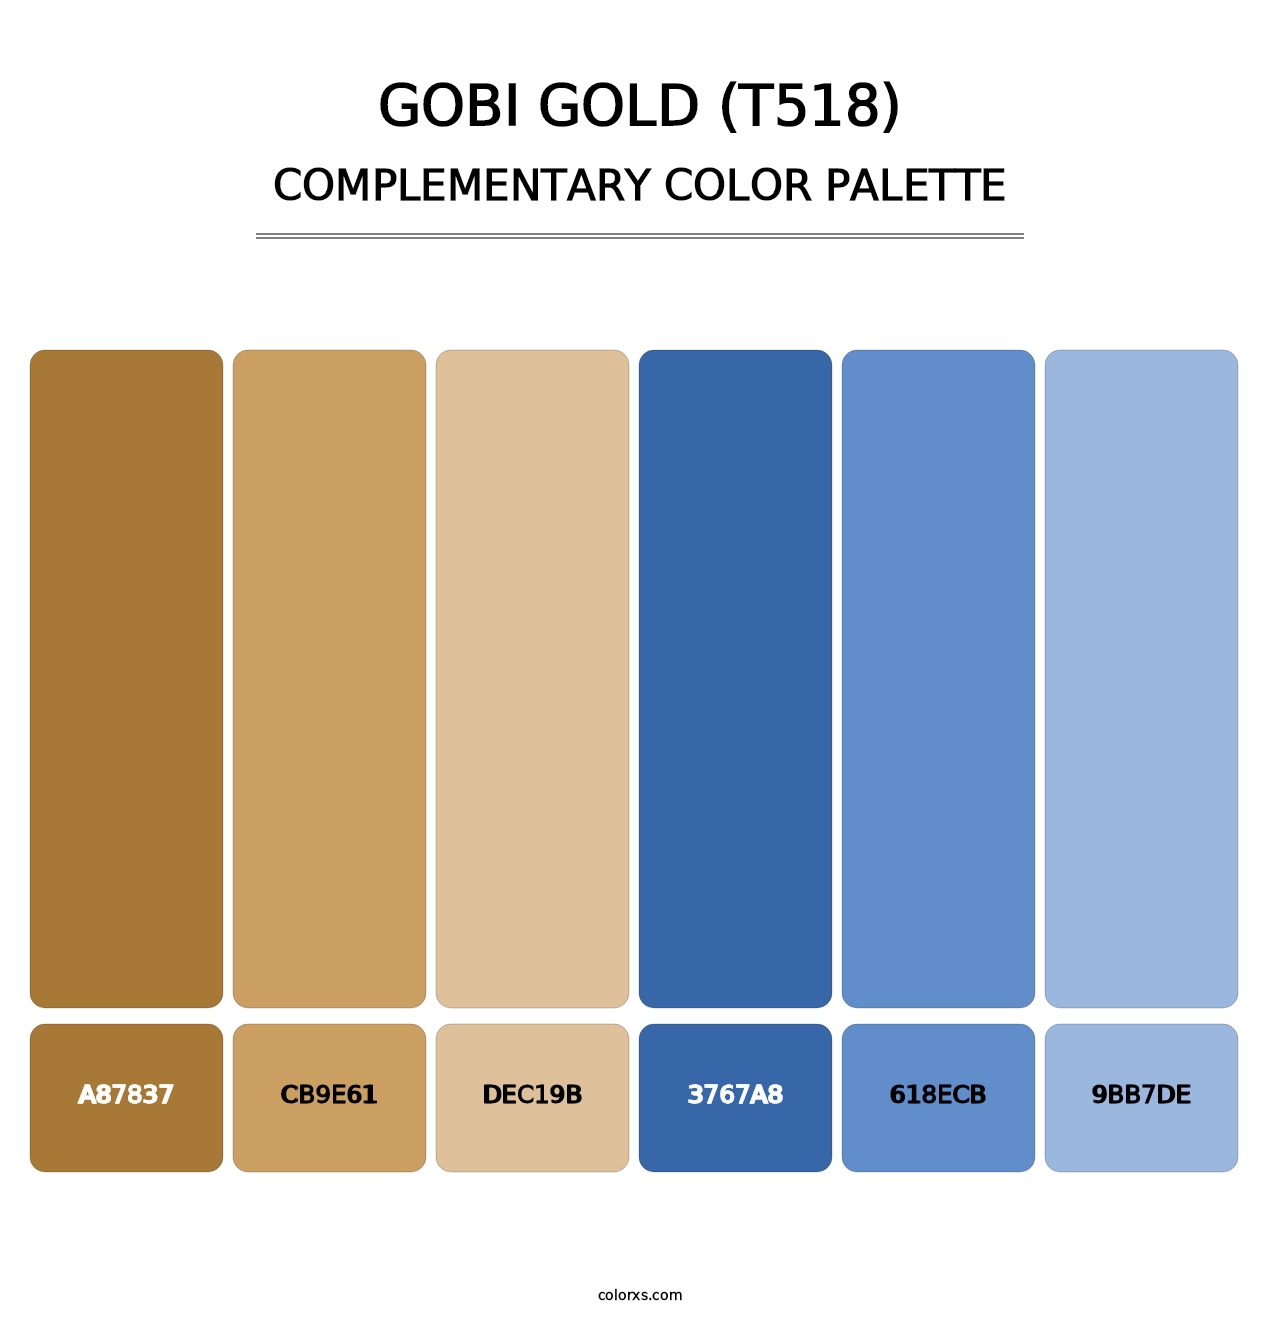 Gobi Gold (T518) - Complementary Color Palette